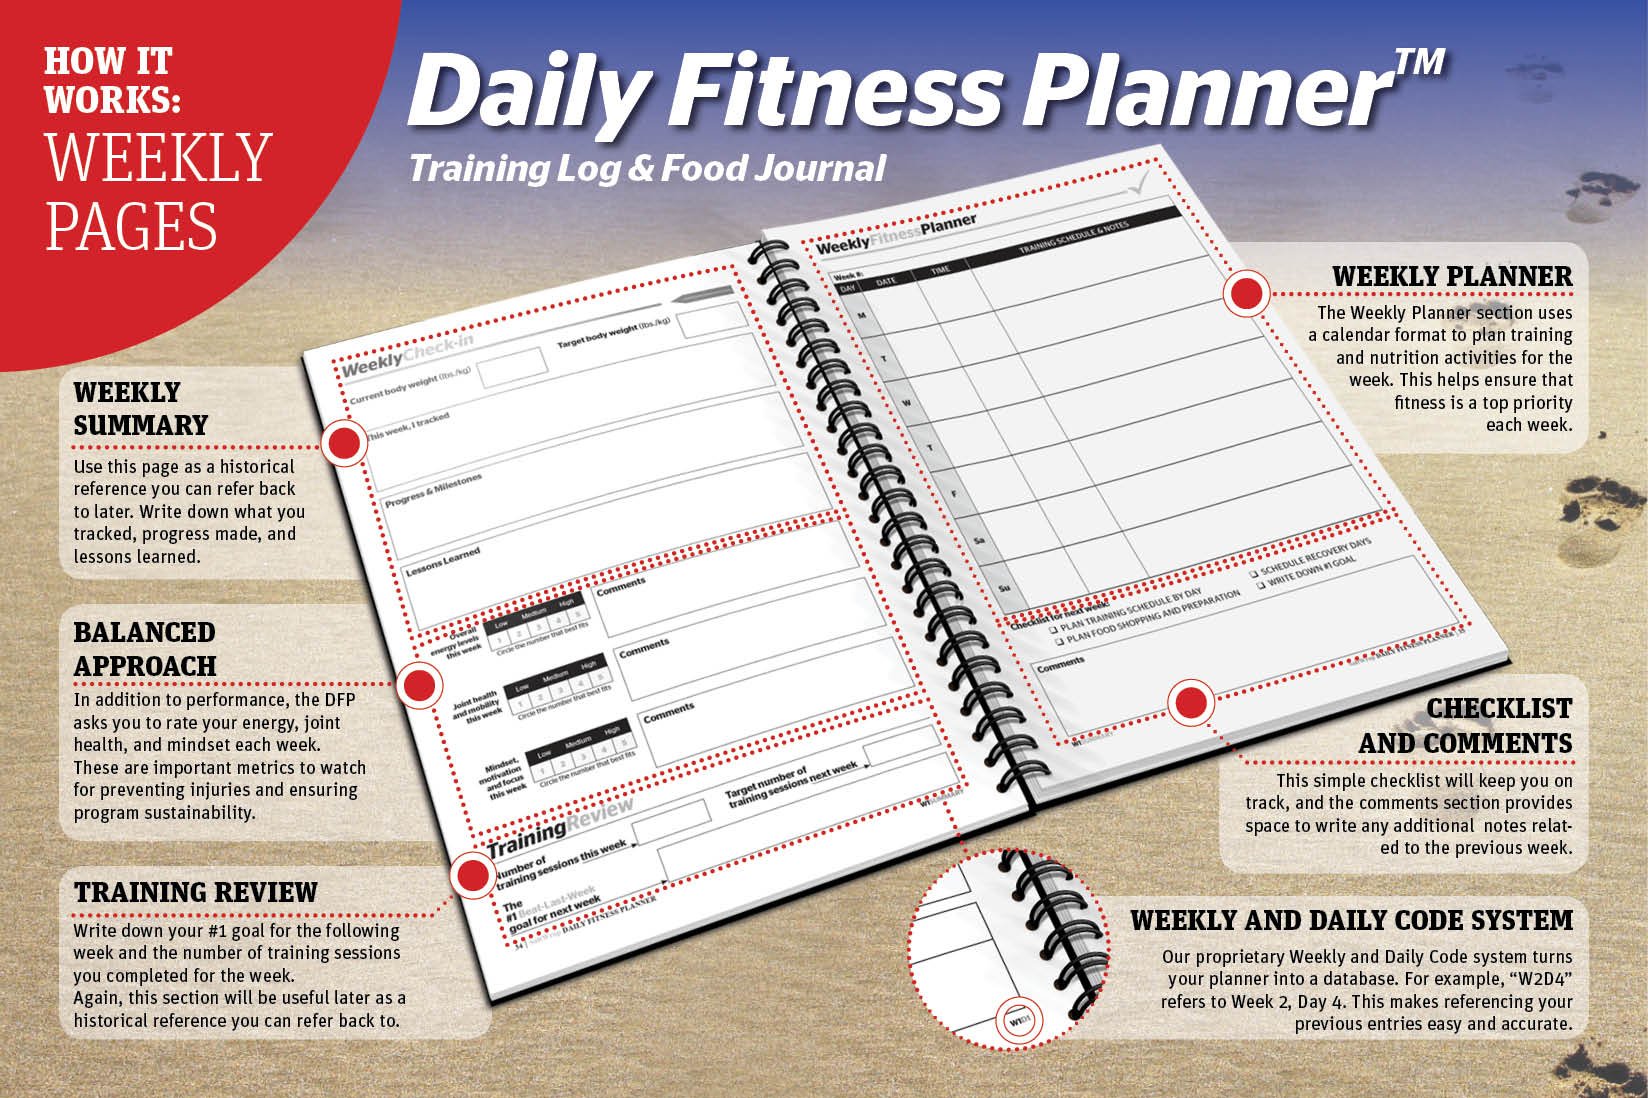 SaltWrap Daily Fitness Planner - Gym Workout Training Log, Weightlifting Exercise Journal, and Food/Diet Tracker - Daily and Weekly Pages, Goal Tracking, Spiral-Bound, 7 x 10 inches